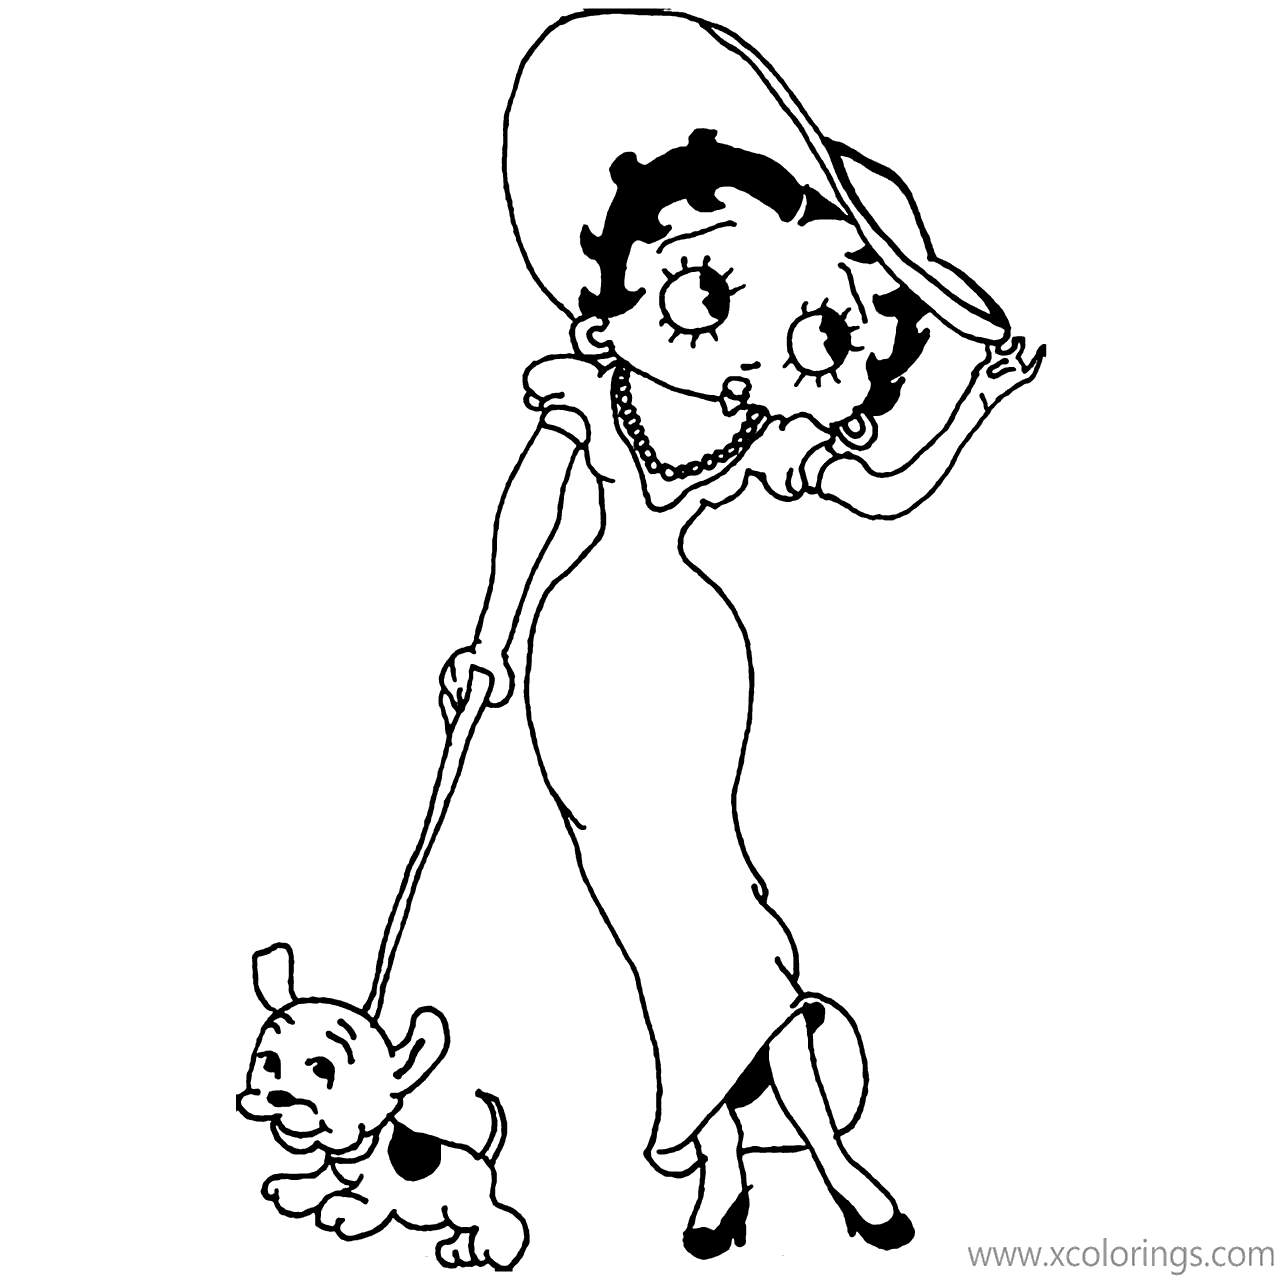 Free Betty Boop and Dog Coloring Pages printable